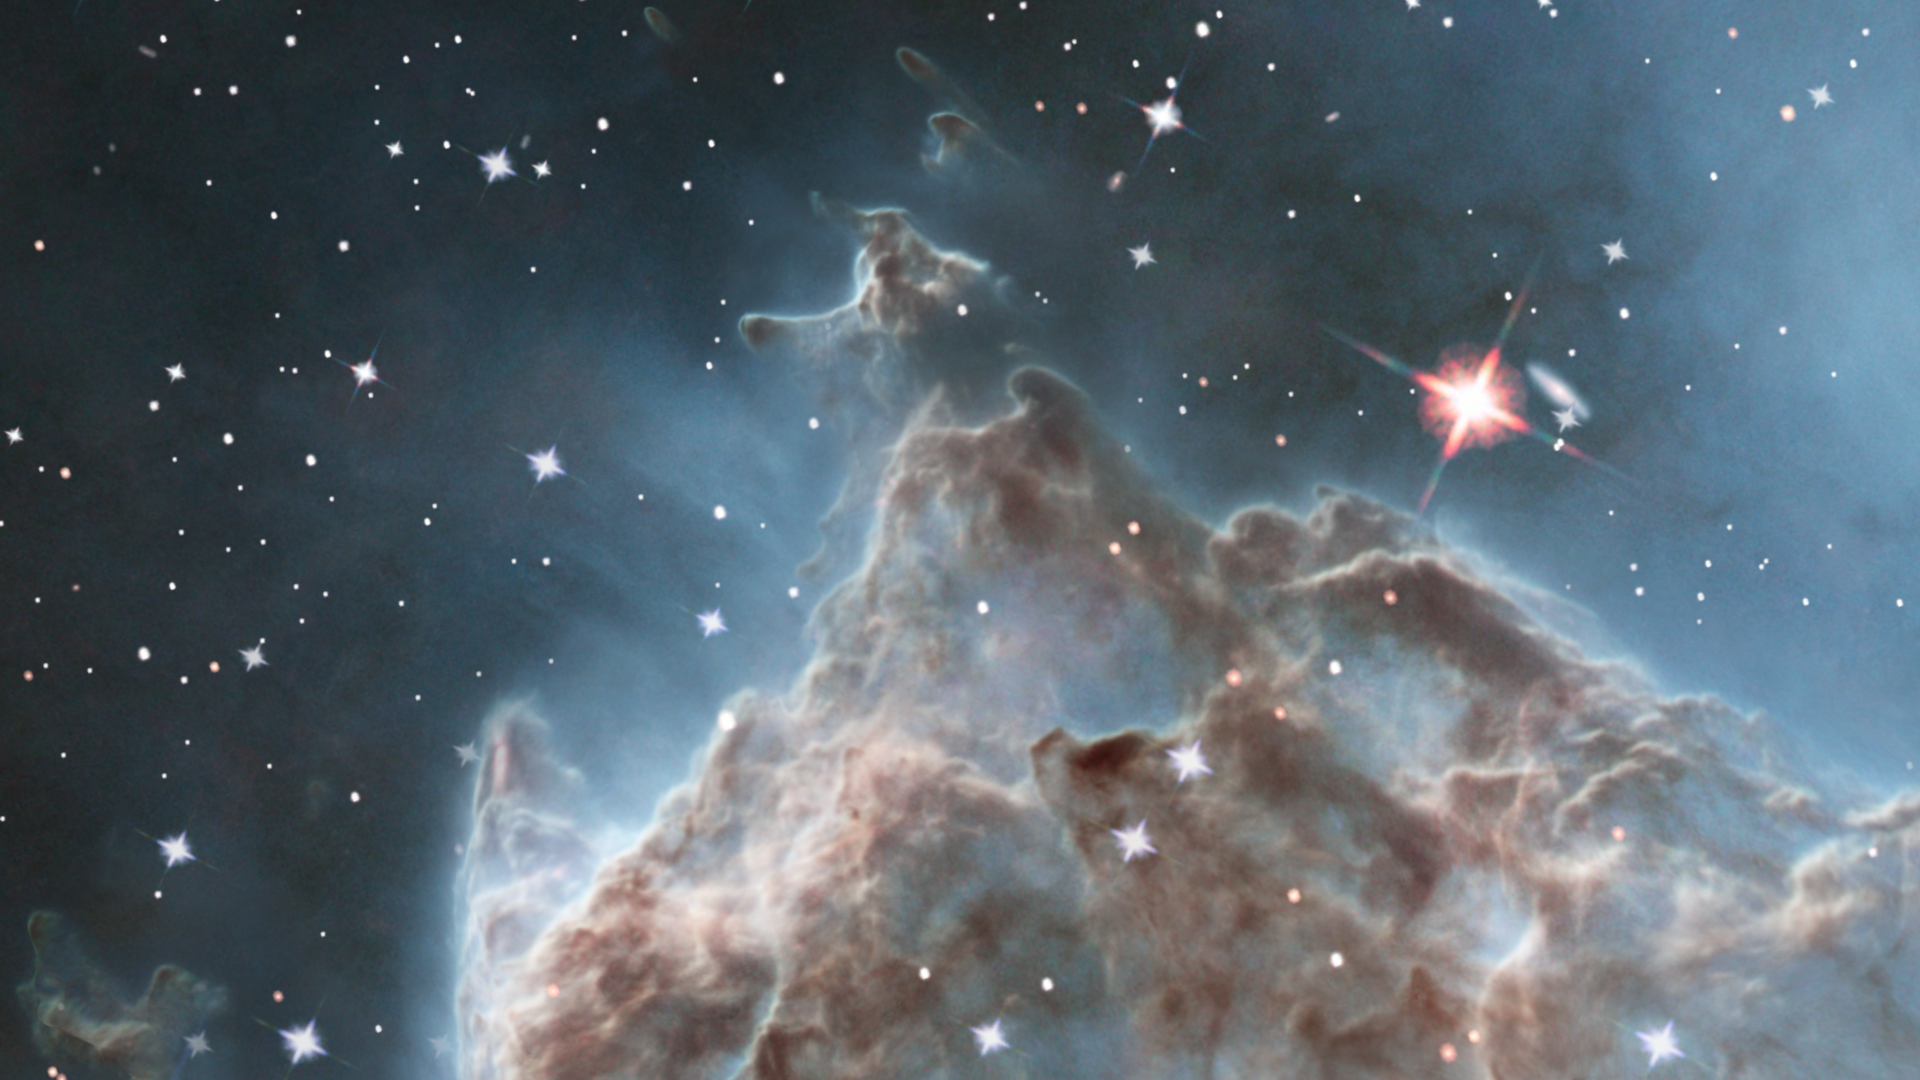 This scientific visualization zooms from the night sky to some pillars in the Monkey Head Nebula (aka NGC 2174). After cross-fading to an infrared view, the sequence showcases the 3D nature of these gaseous peaks.